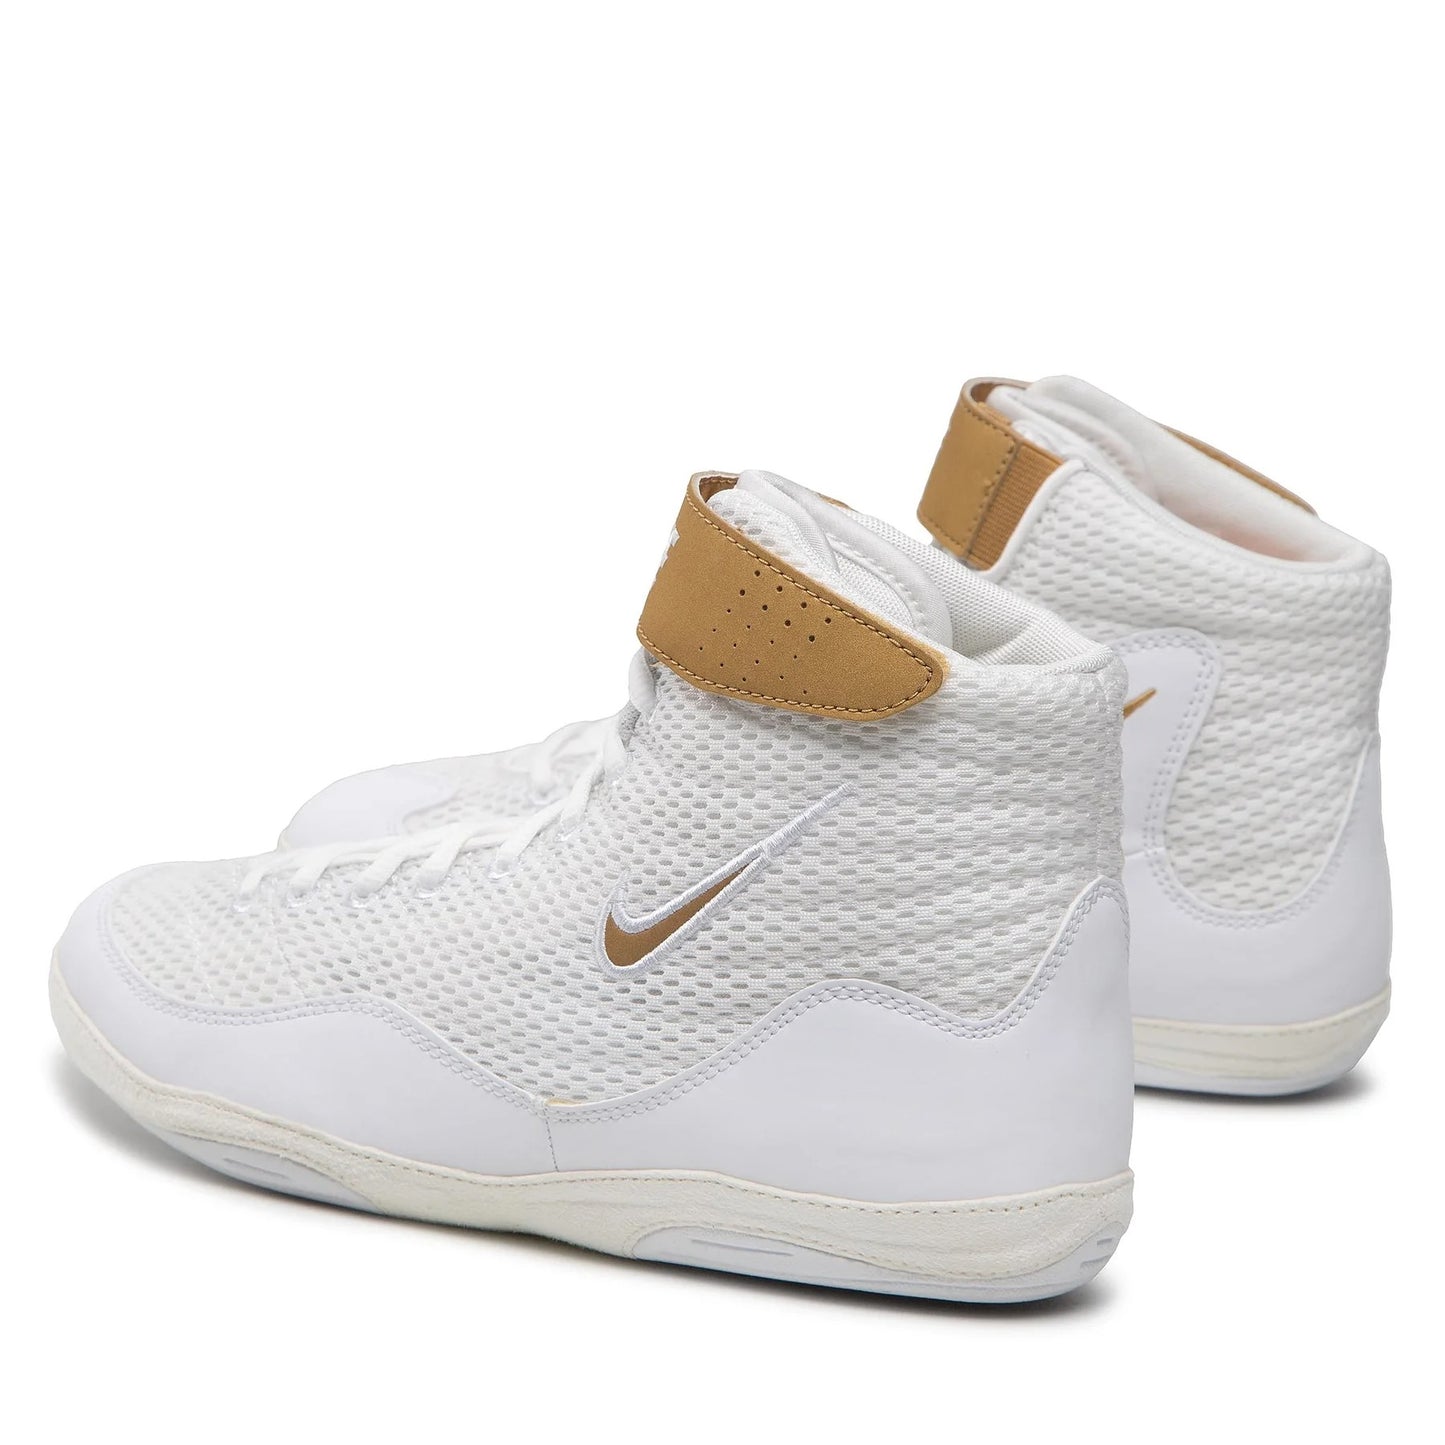 Chaussures De Lutte Inflict 3 Nike - Blanc/Or